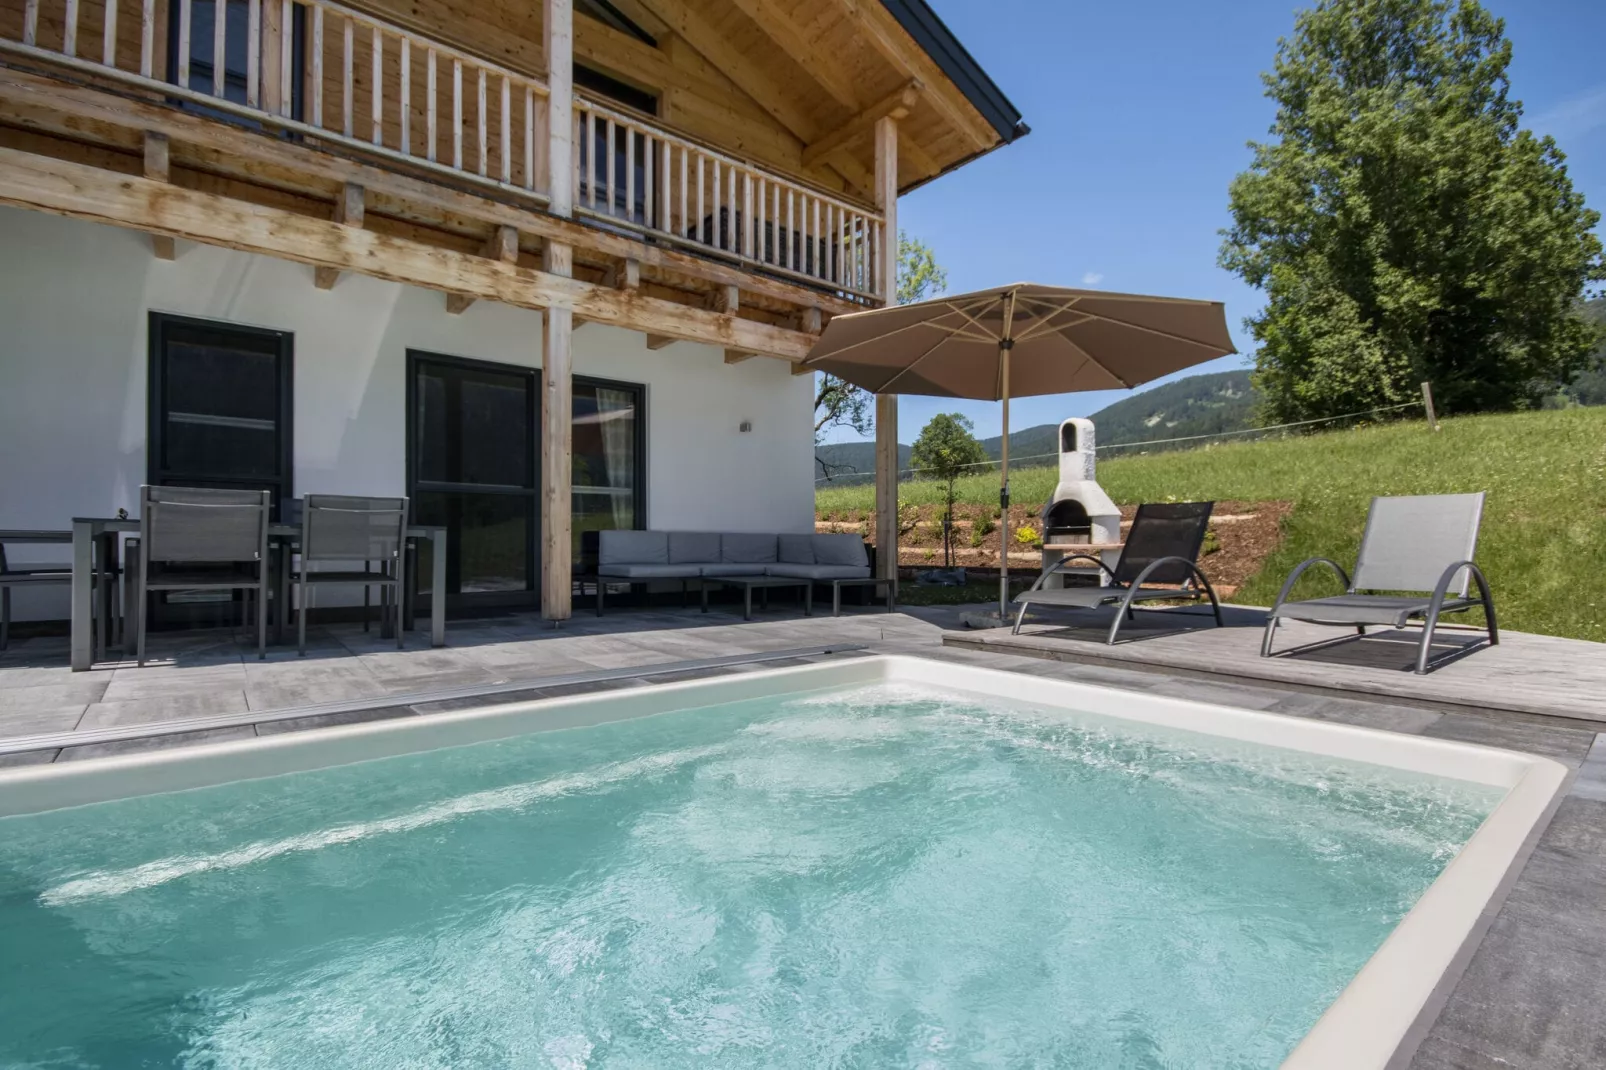 Chalet Gamsknogel Inzell-Zwembad